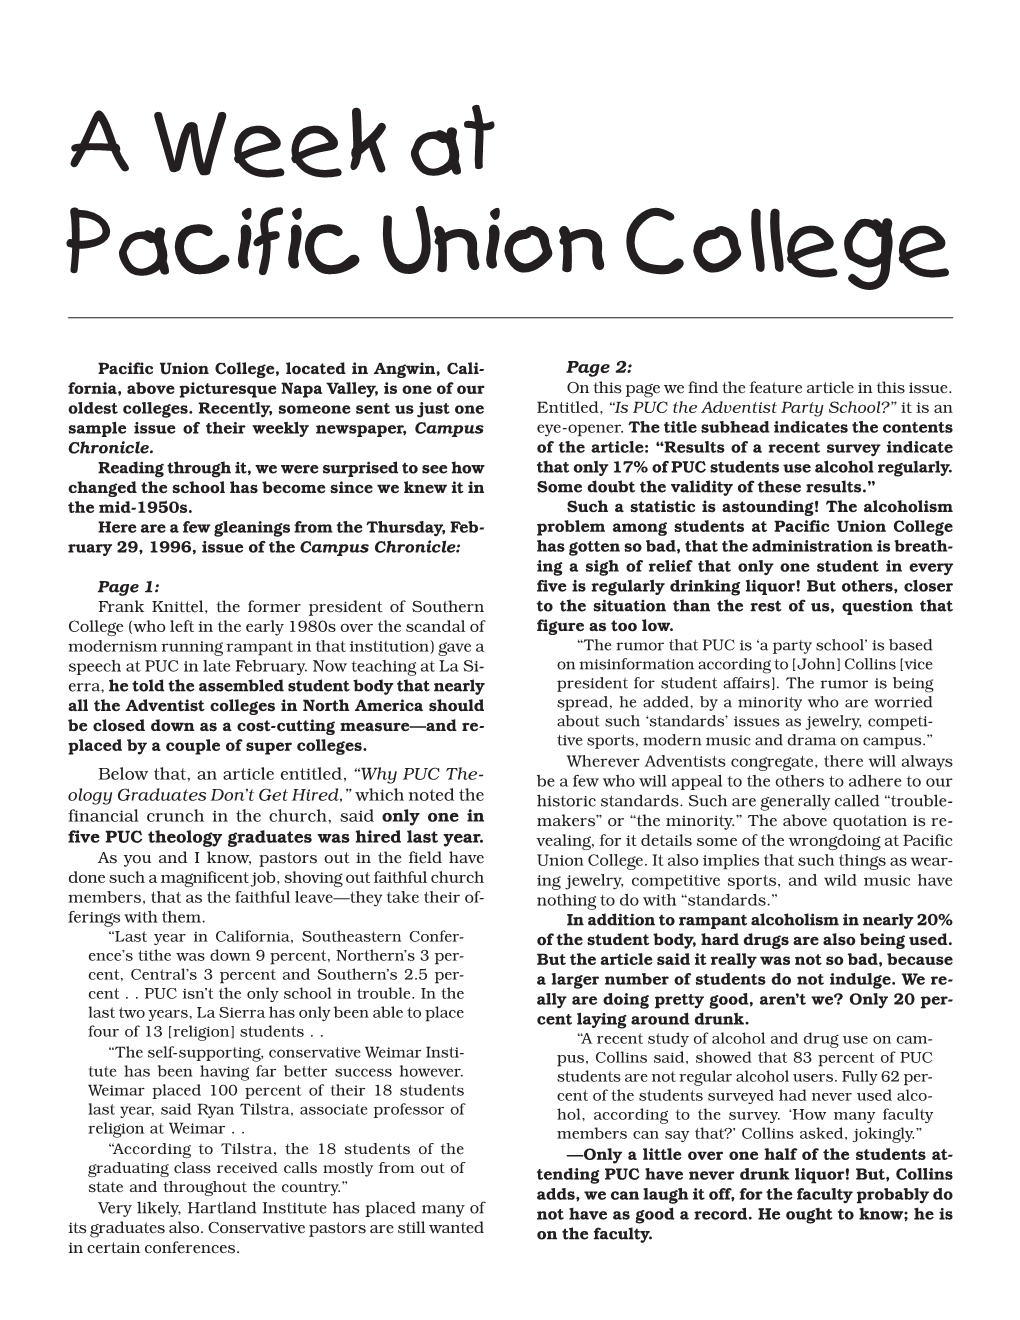 A Week at Pacific Union College